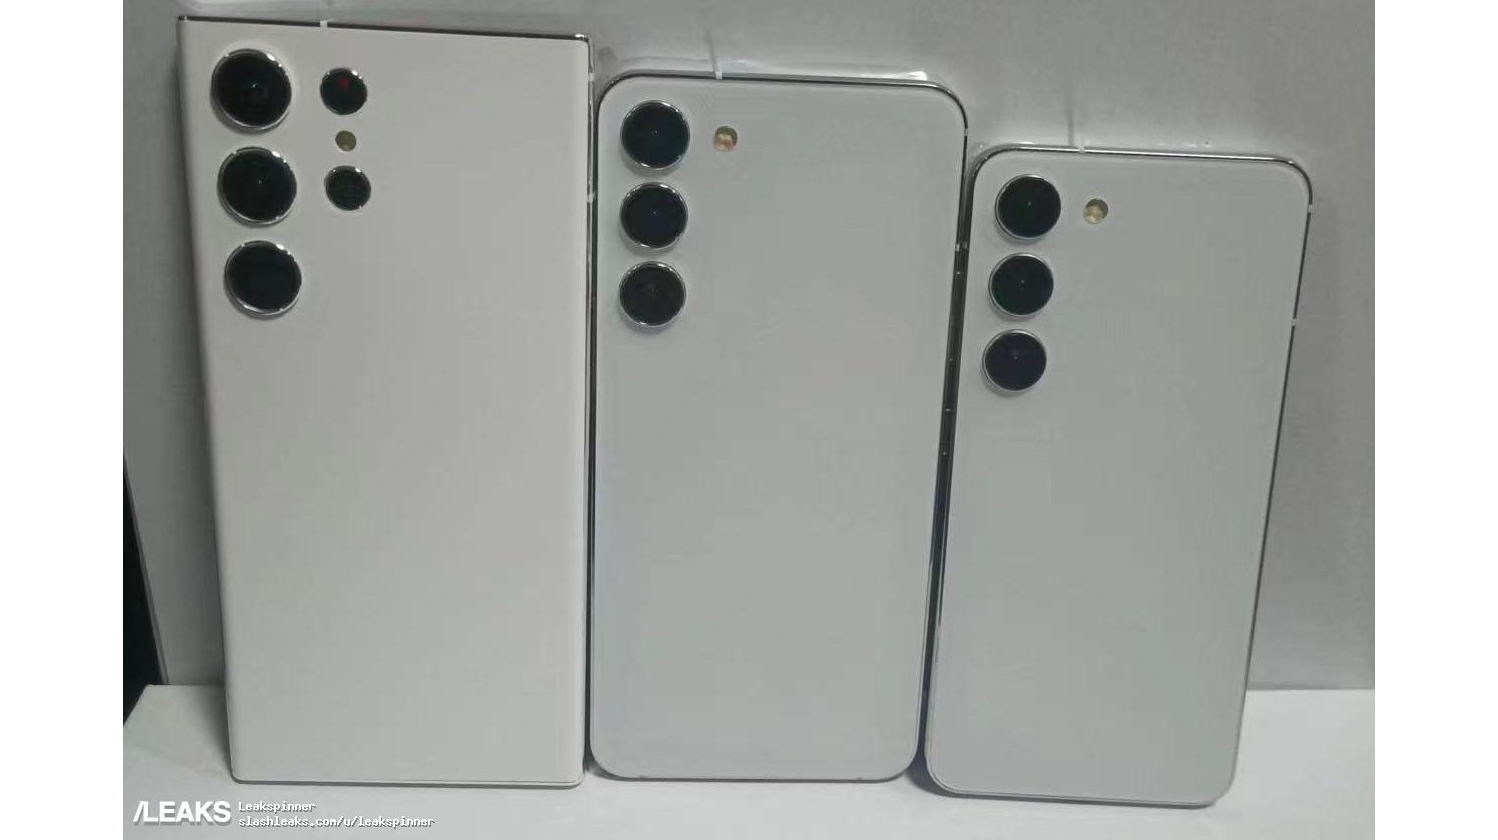 Leaked dummy units of the Galaxy S23 series